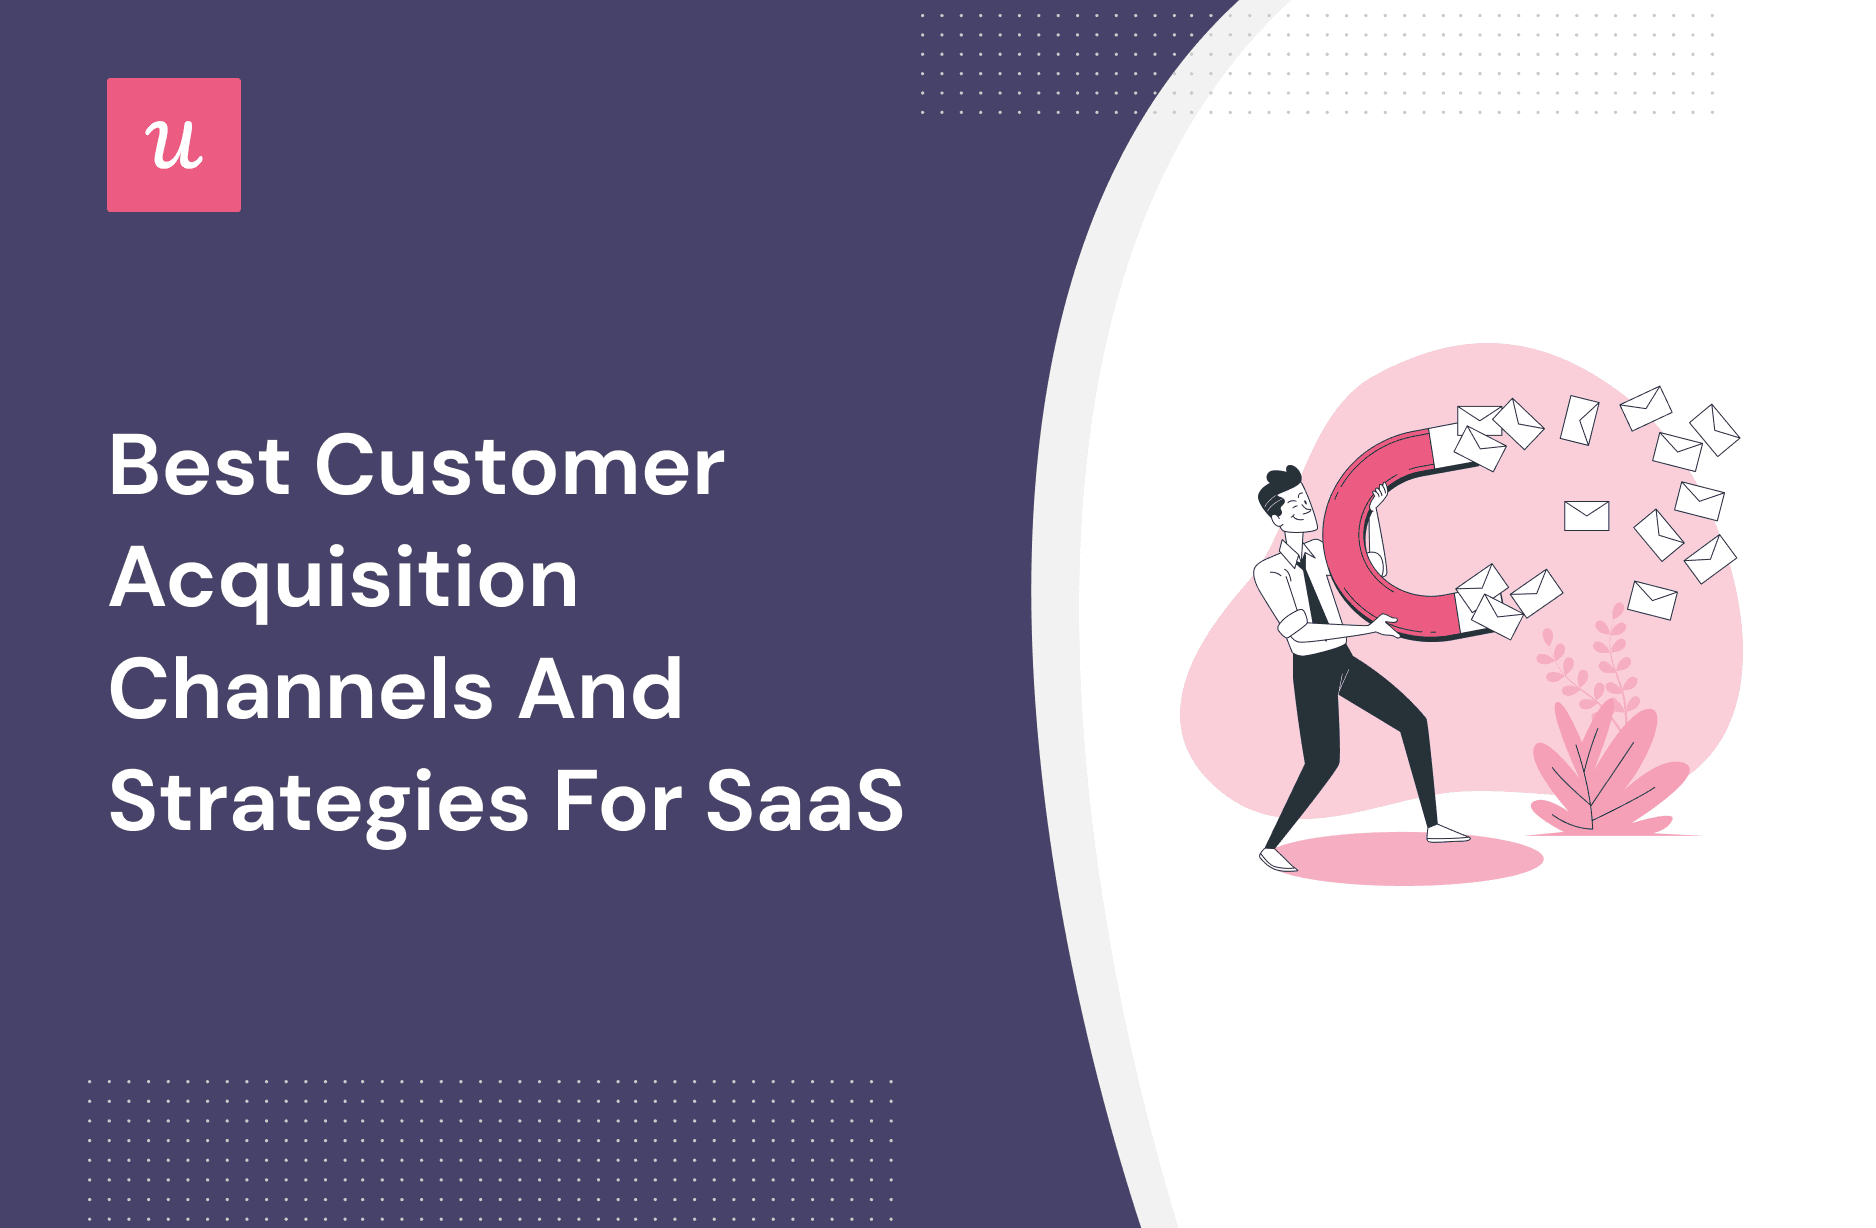 Best Customer Acquisition Channels and Strategies For SaaS cover